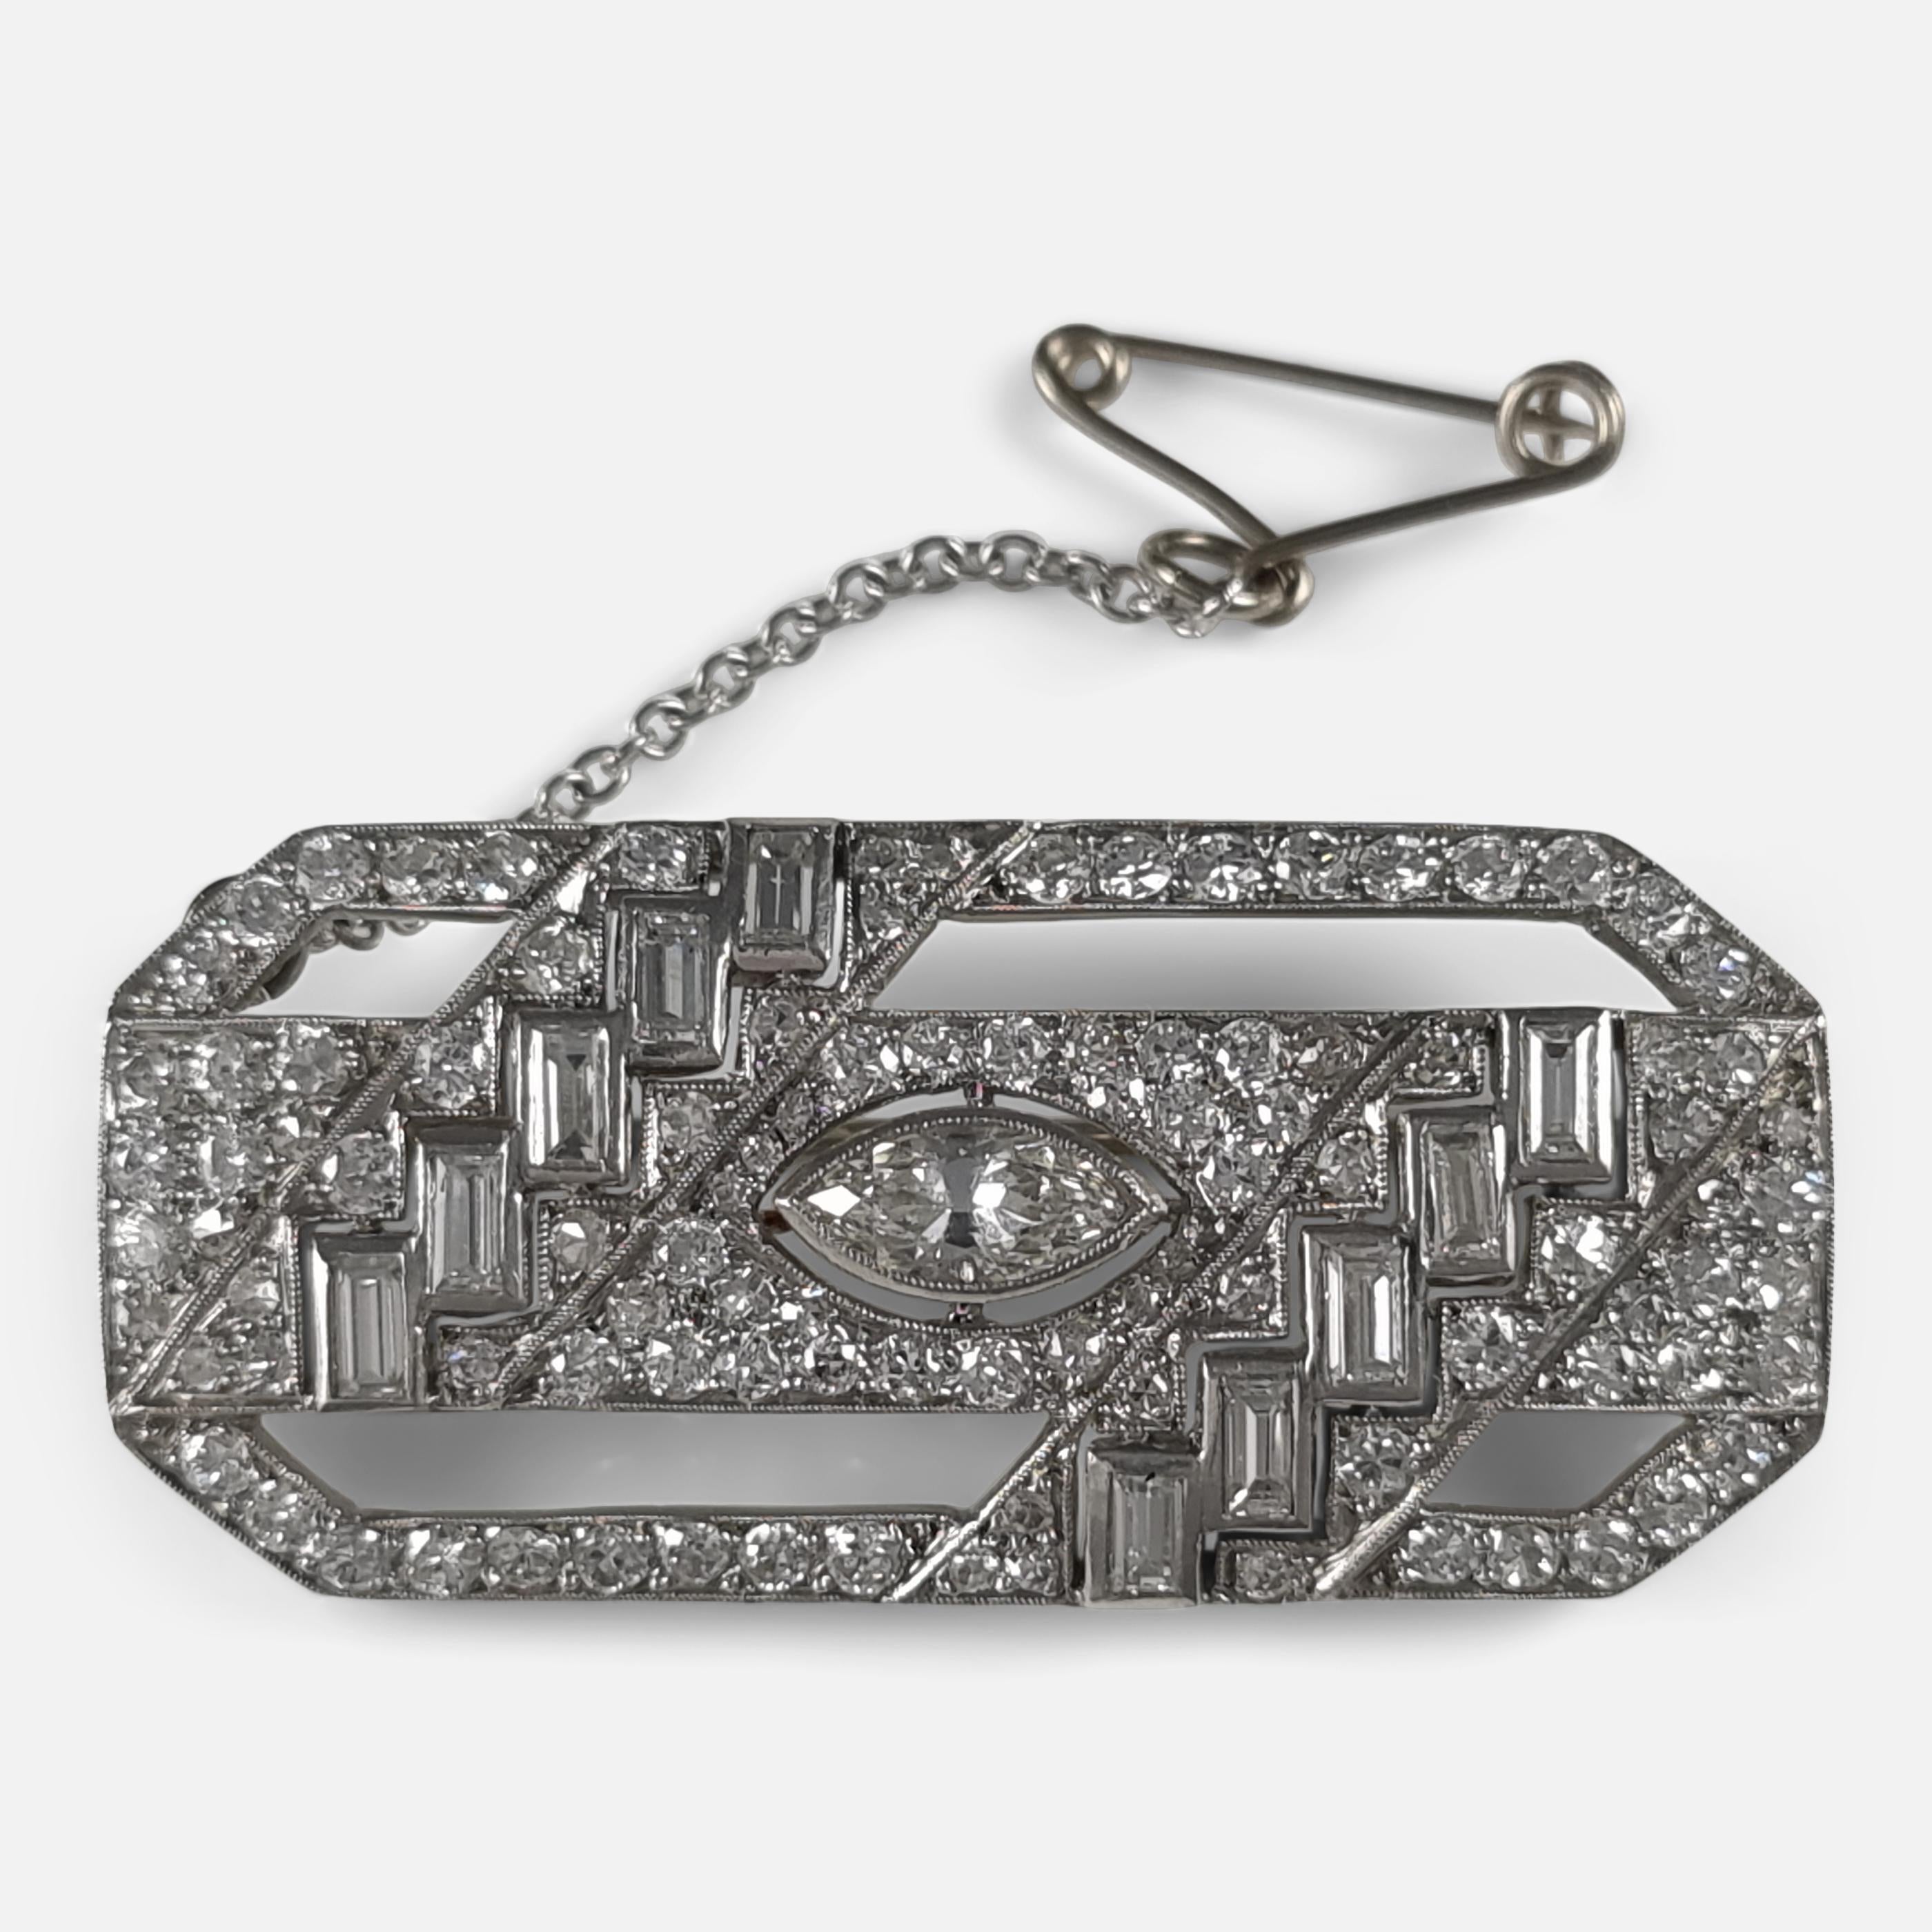 An Art Deco period platinum diamond brooch.  The art deco style brooch is set with a central marquise cut diamond weighing approximately 0.37ct within a platinum rectangular surmount set throughout with a further 102 diamonds totaling approximately